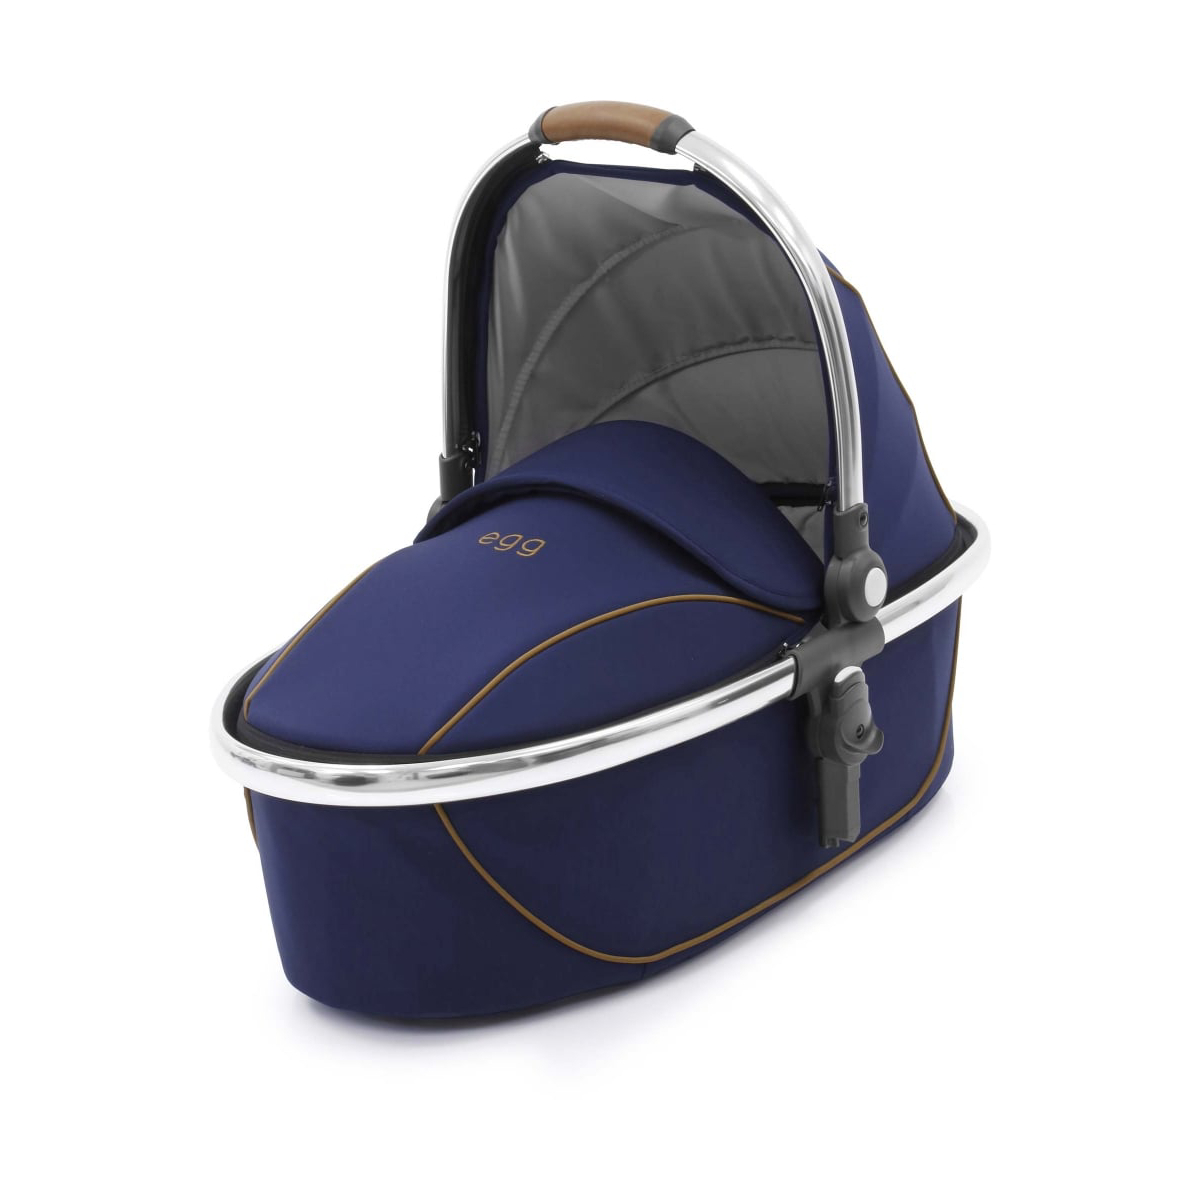 egg Carrycot